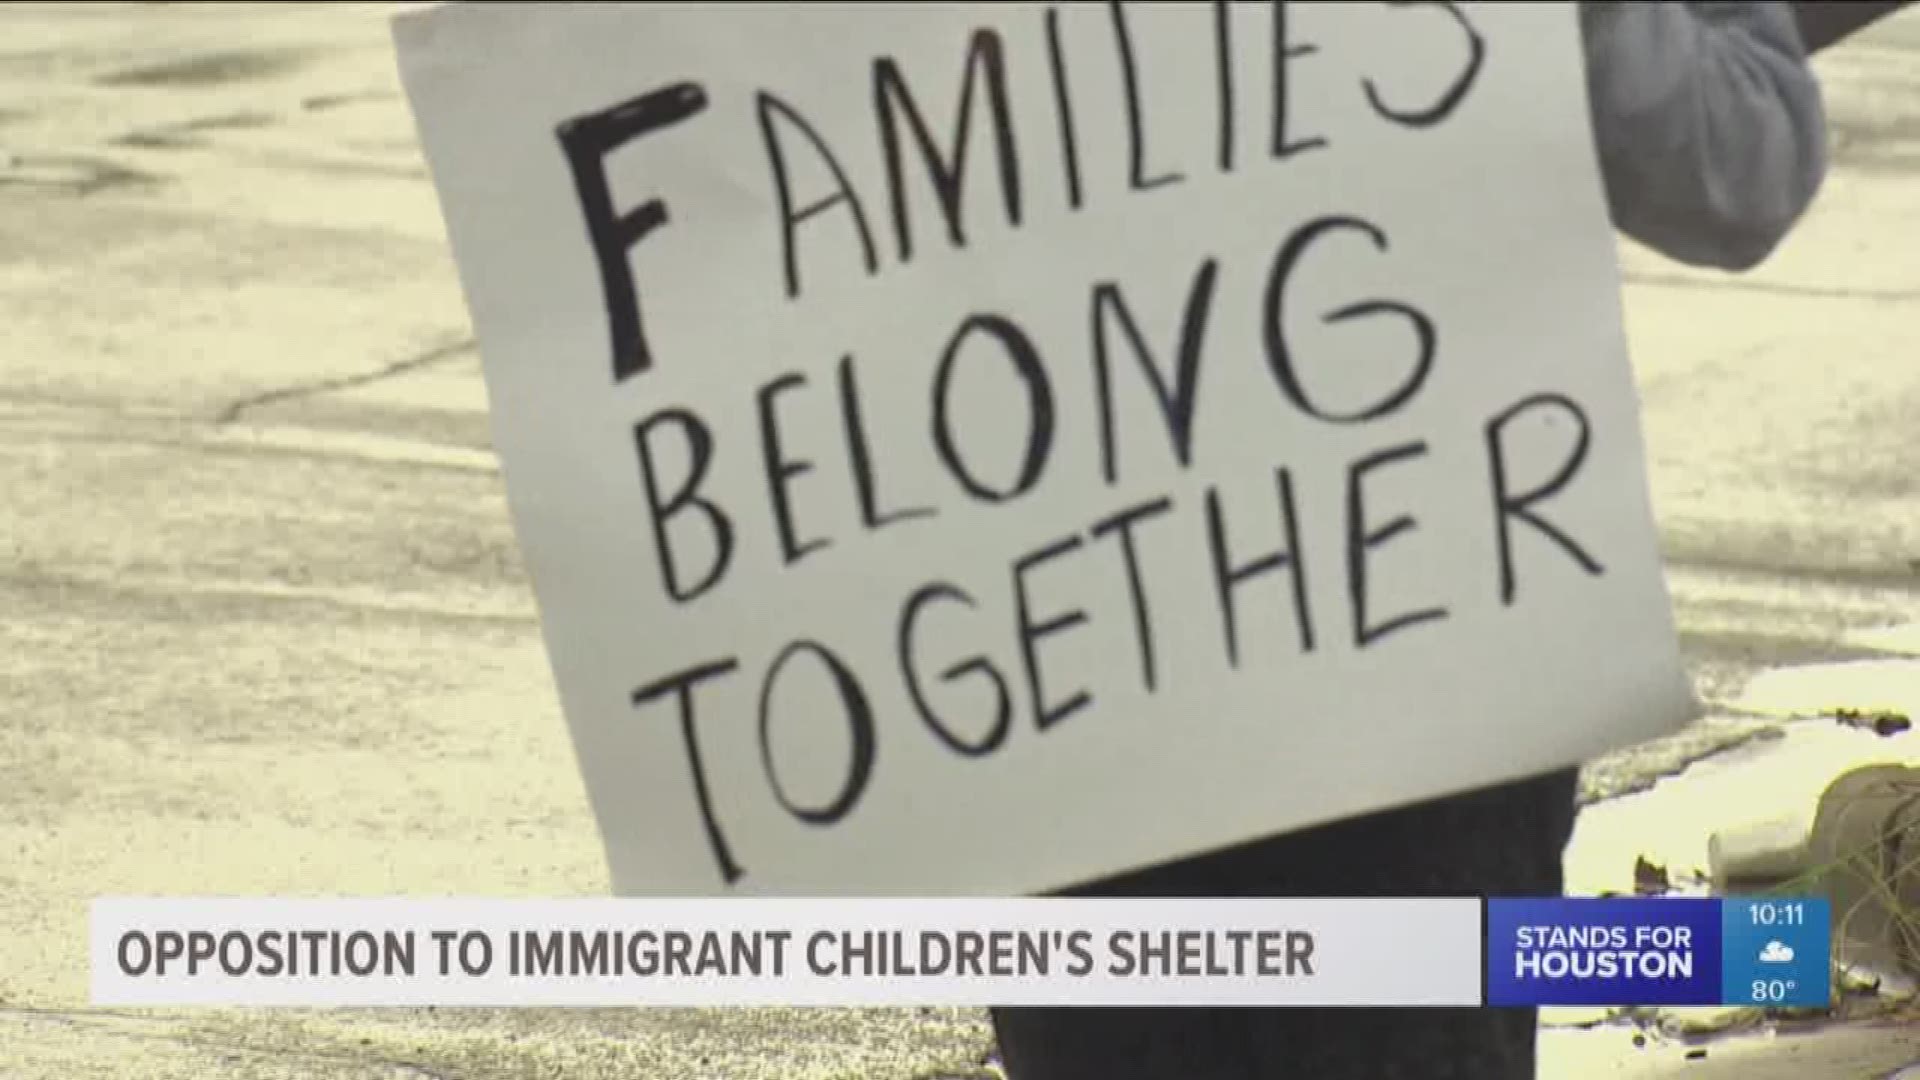 Activists show opposition to immigration children's shelter in Houston